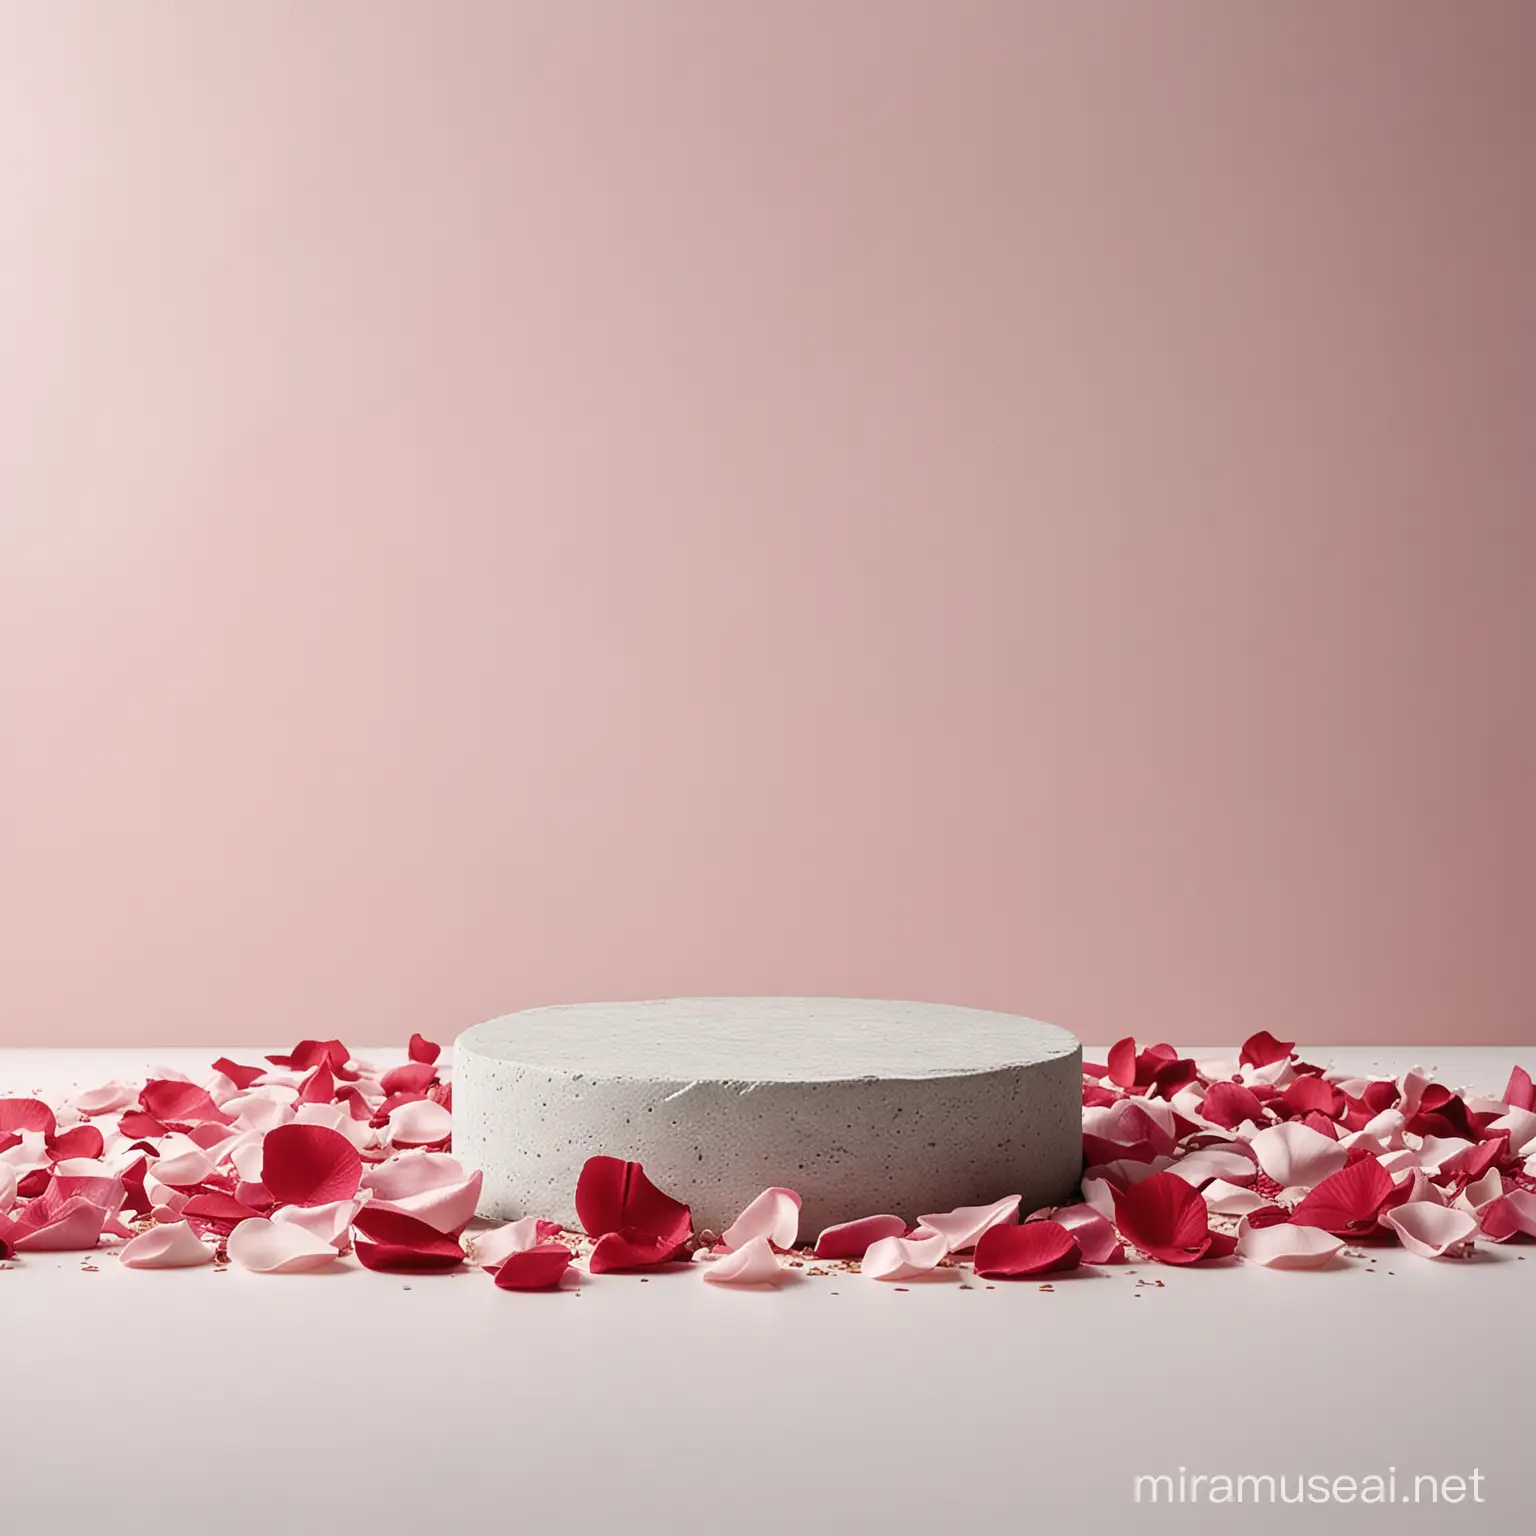 Frontal shot, highly realistic composition for a cosmetic product shoot, space for product and its packaging, featuring a gray-white stone circular base in the middle, occupying about 1/4 of the shot, with empty space on it, scattered around are light red rose petals, with a white wall adorned with decorative elements in the background, all in white, light pink, and gold accents.